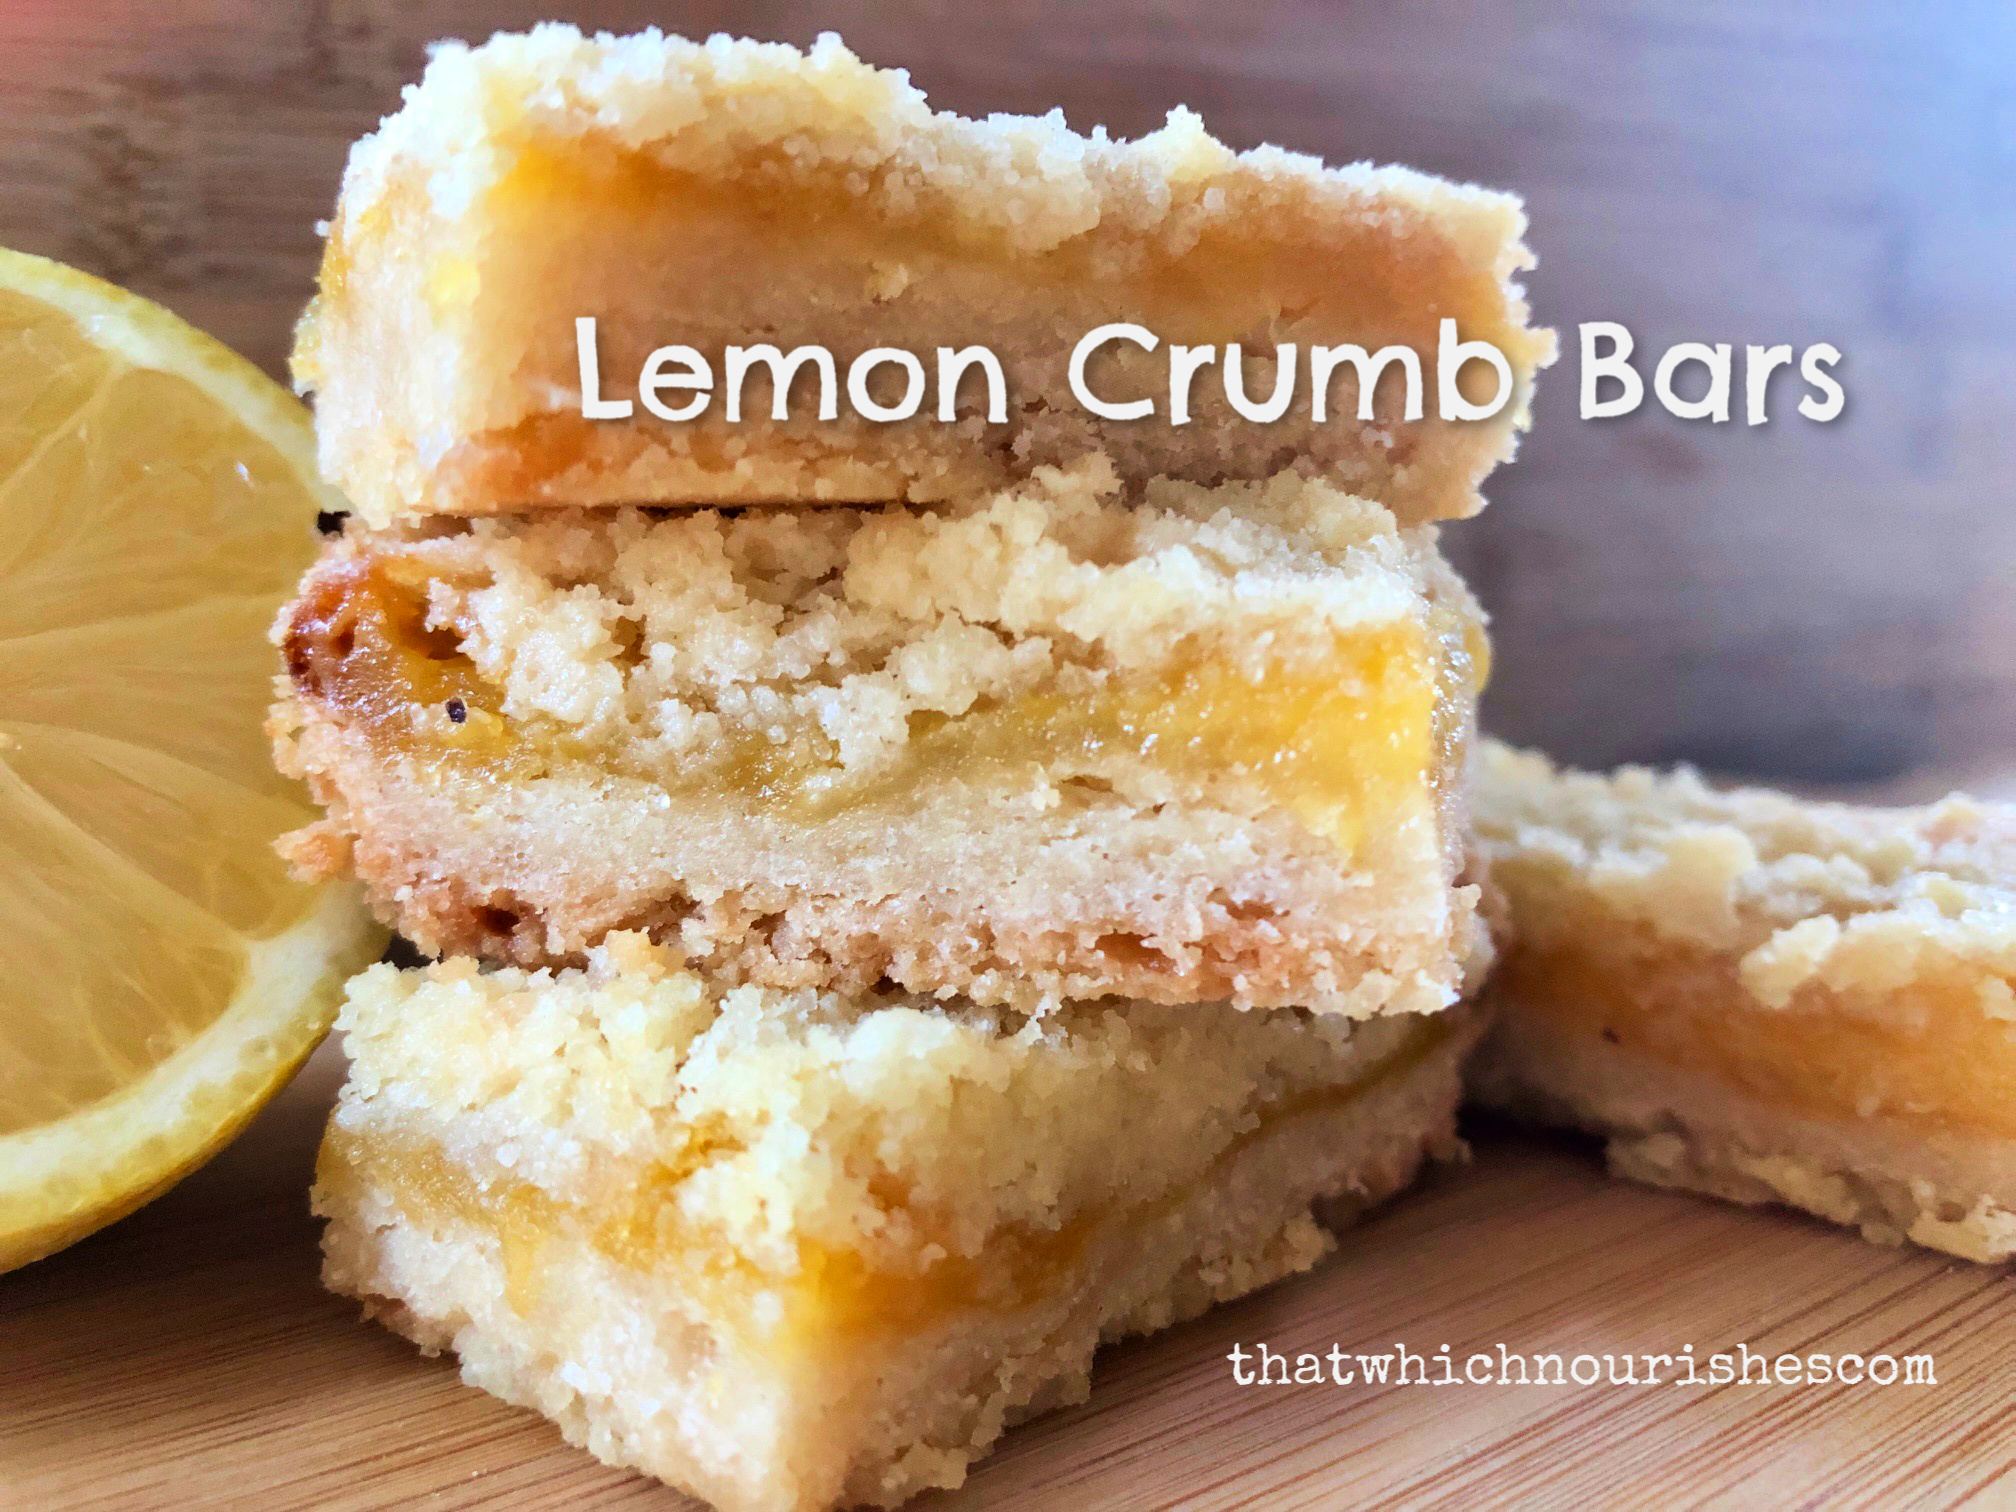 Lemon Crumb Bars -- Tart, bright and as lemony-delicious as a dessert can get, these Lemon Crumb Bars with their soft, buttery crumbs and lemon curd filling are quick to make and quicker to disappear! | thatwhichnourishes.com